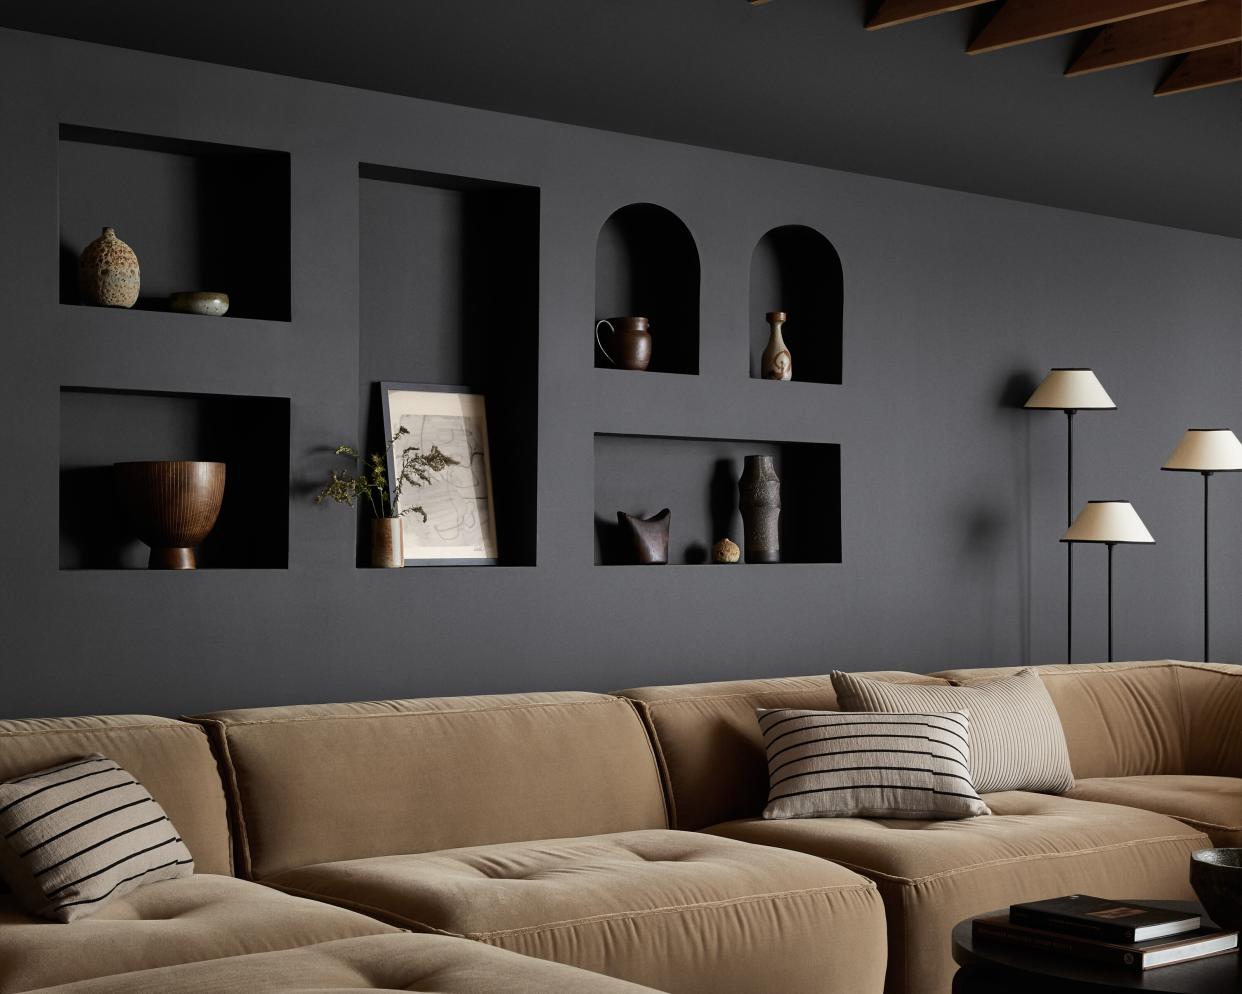  A black living room wall with niches. 